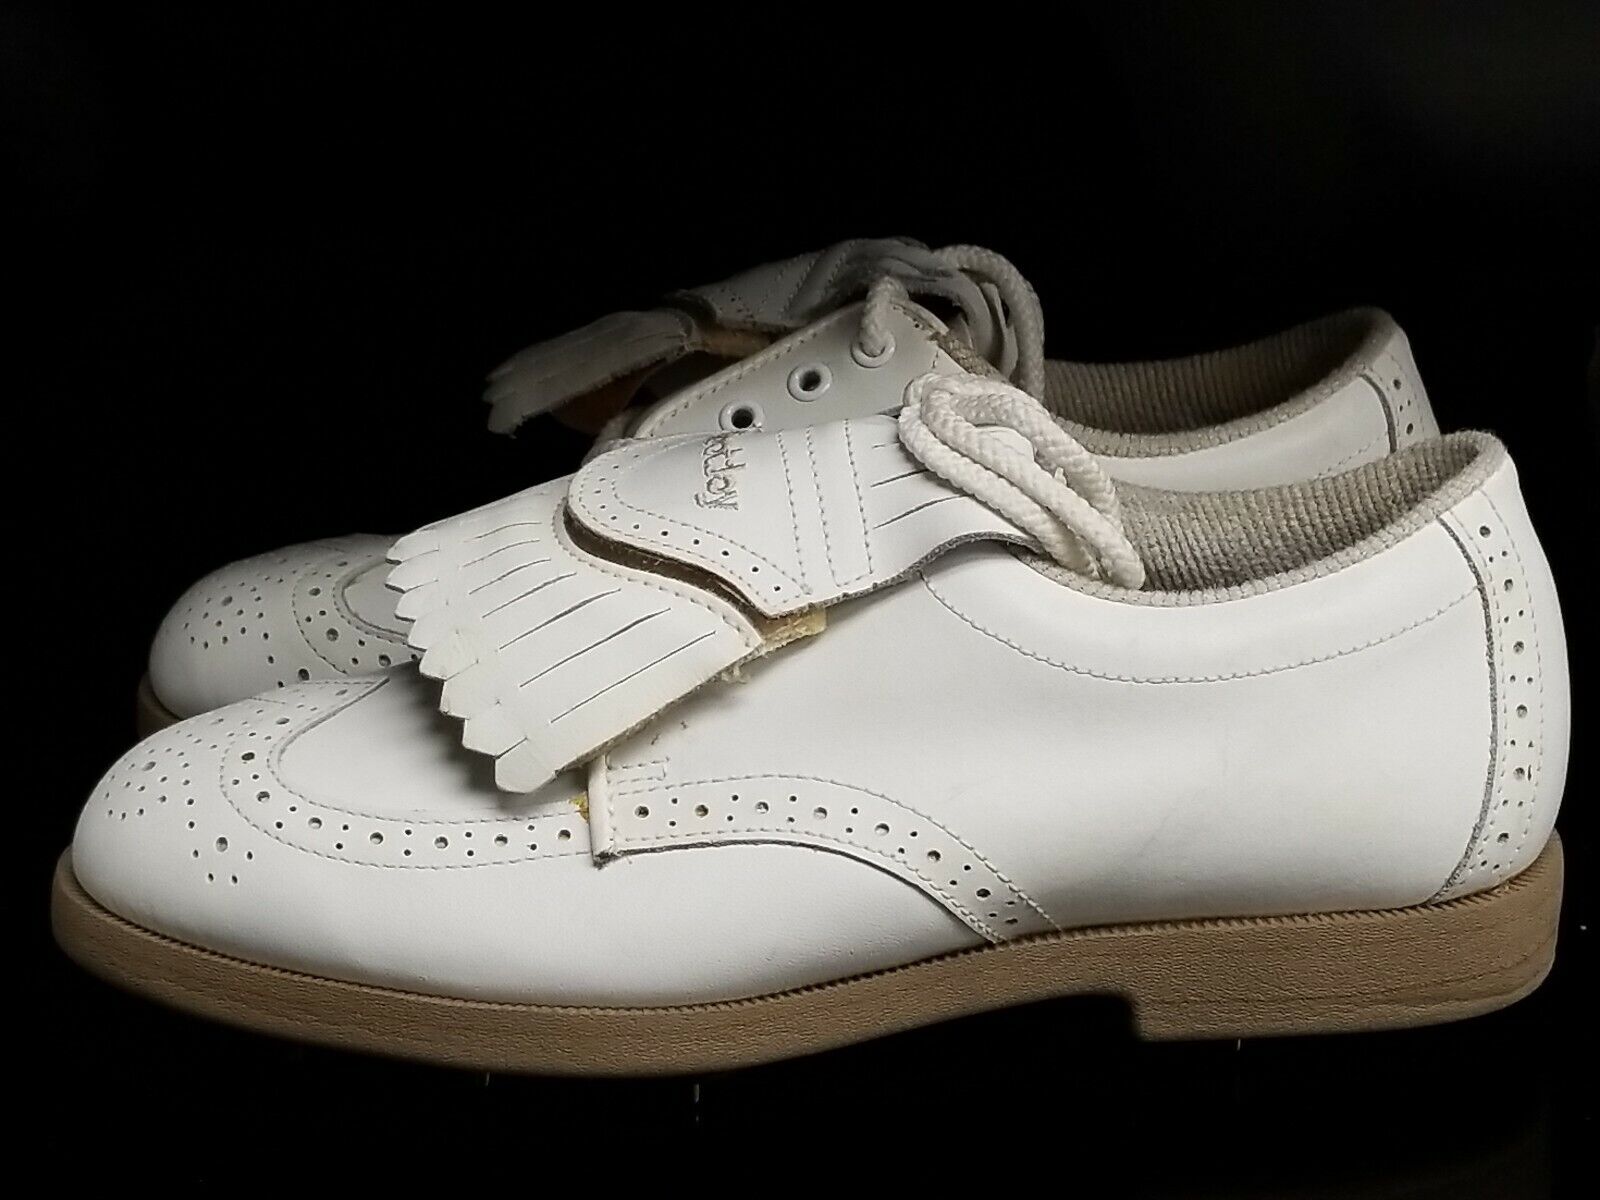 FootJoy Softjoy Terrains White Wing Tip Golf Shoes for Women Size 6M